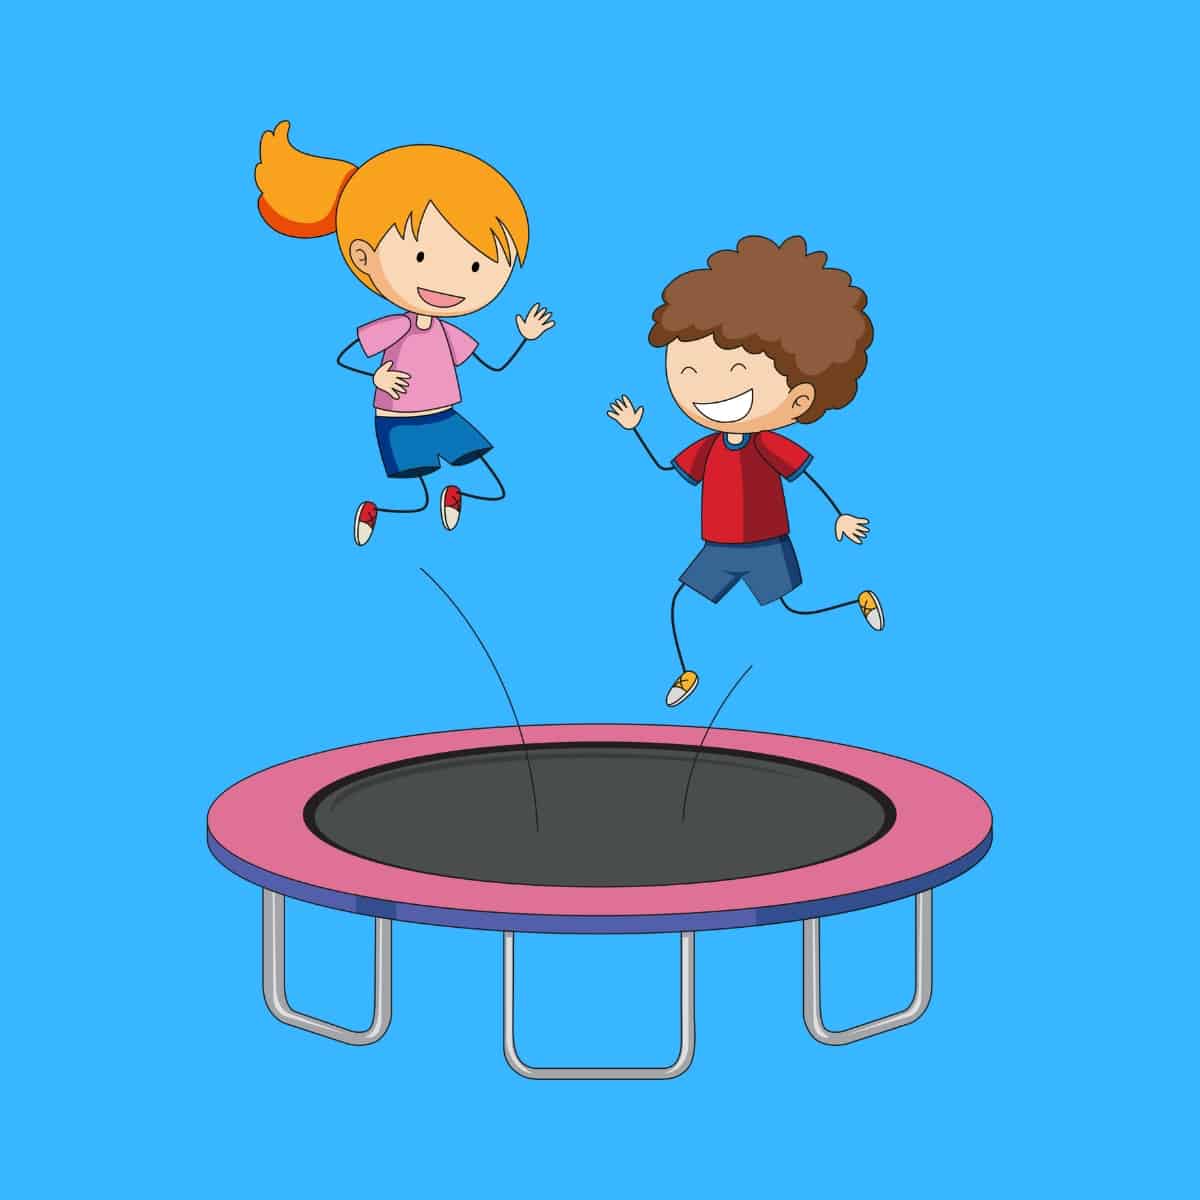 Cartoon graphic of a boy and a girl smiling and jumping on a trampoline on a blue background.